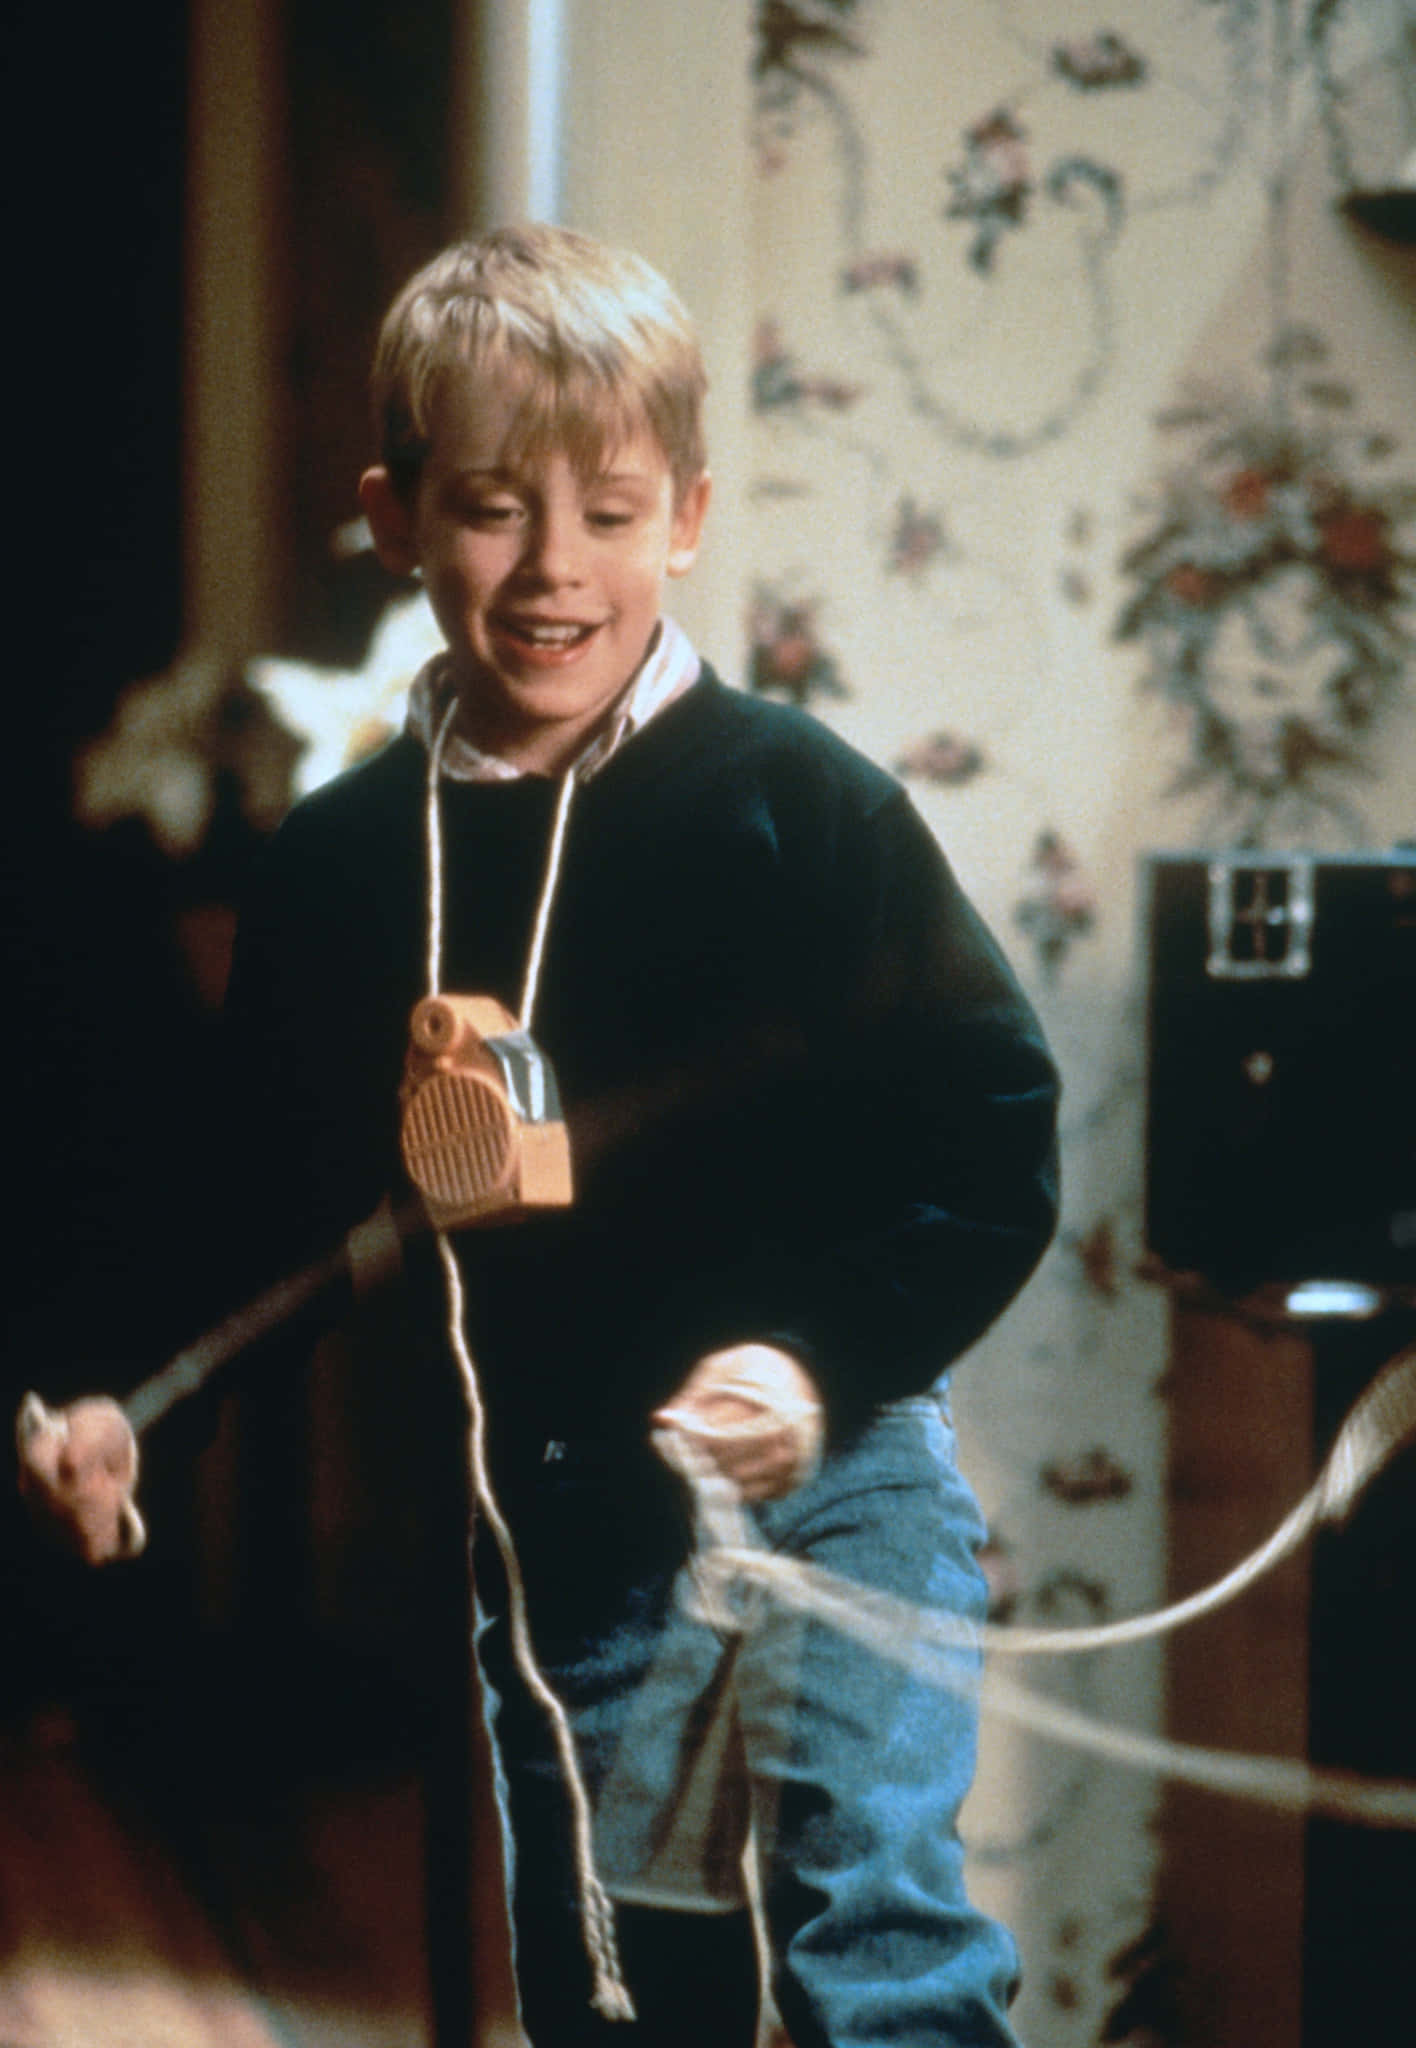 Eight-year-old Kevin McCallister (Macaulay Culkin) dons his signature look of wizard robe and tucks his 20 dollar bill in the pocket in Home Alone (1990).